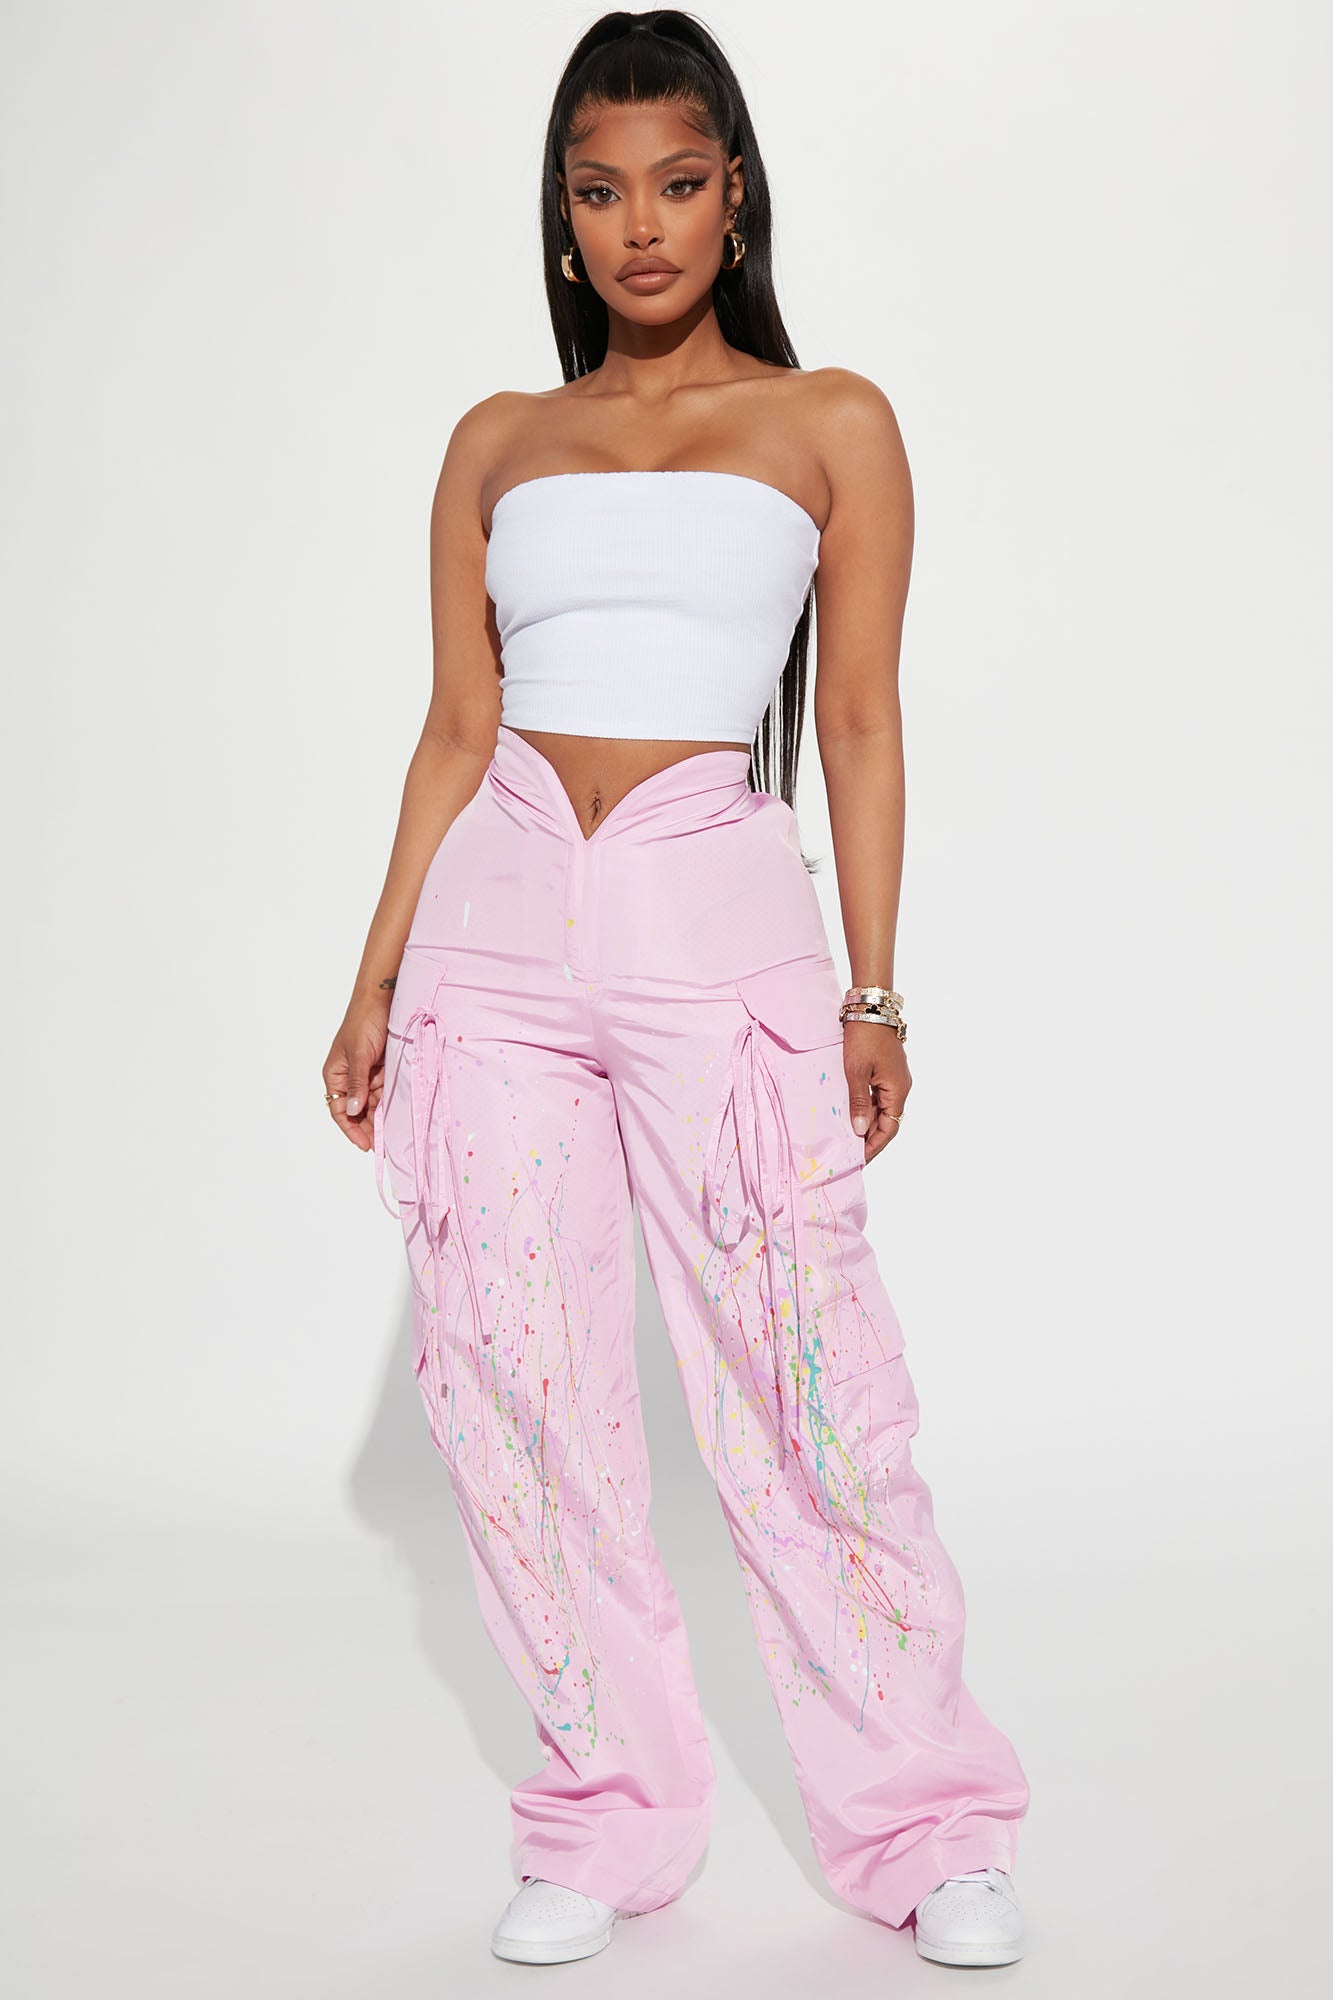 A Laidback Chic Take On Parachute Pants  The Cool Hour  Style  Inspiration  Shop Fashion